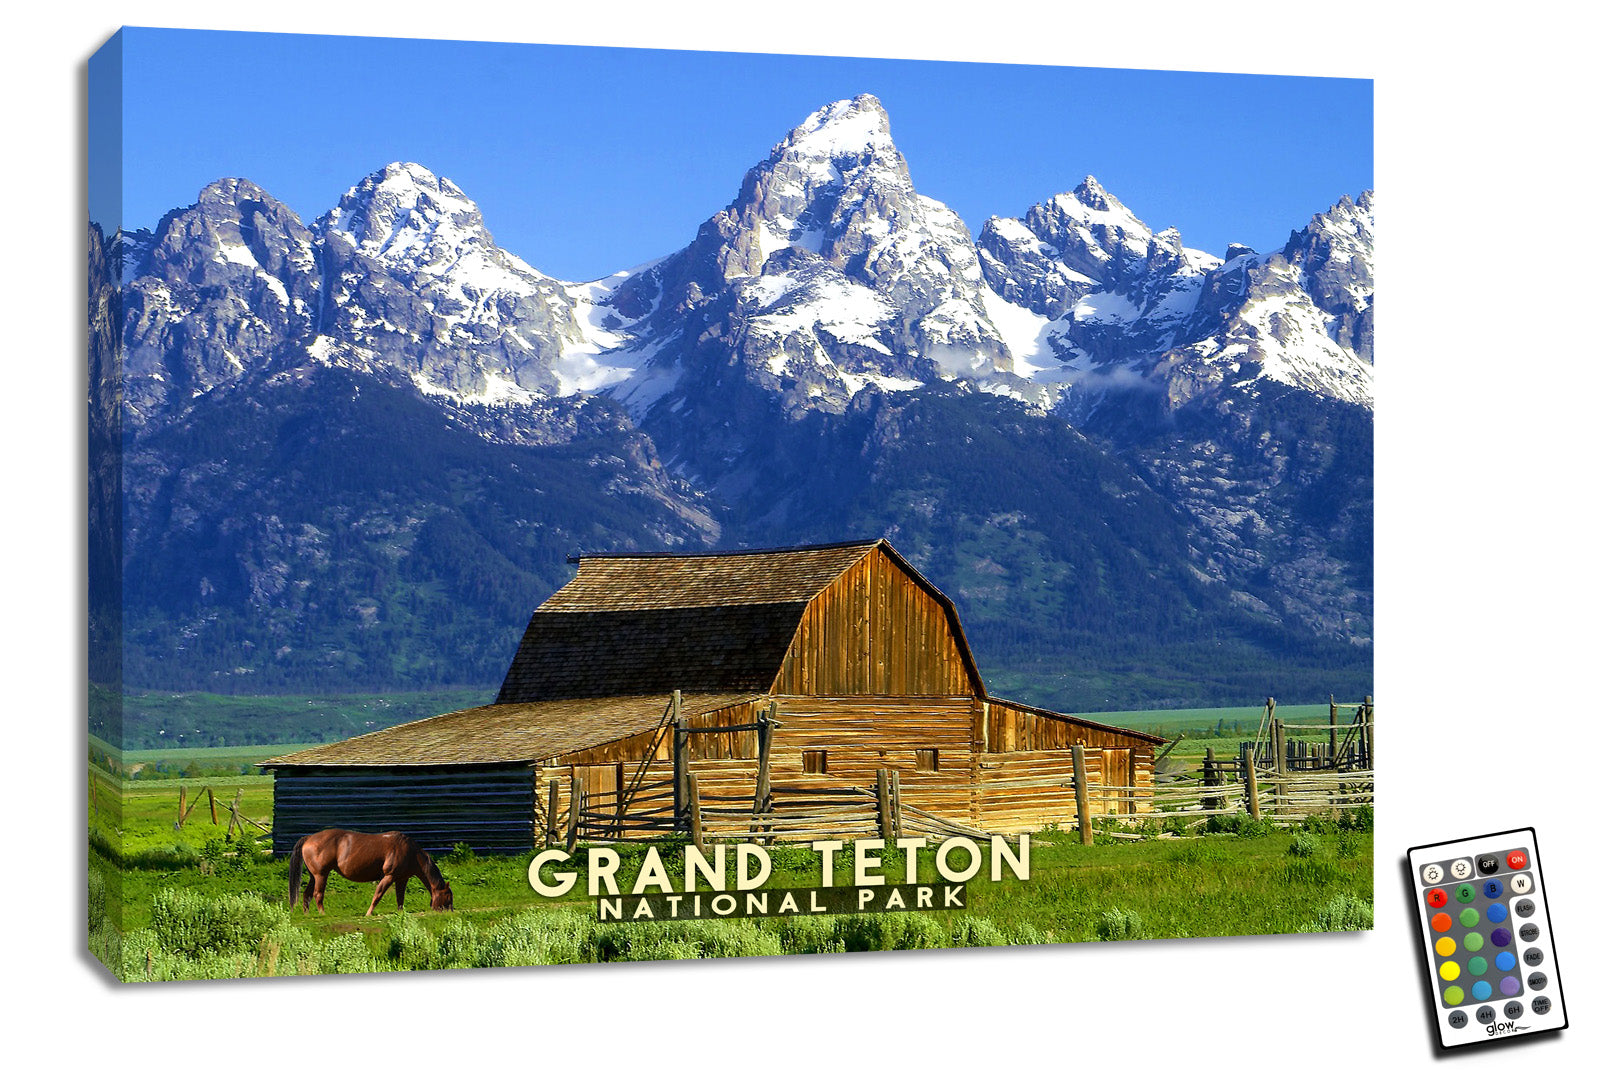  Featuring a stunning image of a rustic barn and a majestic horse standing before the breathtaking snow-covered mountains, this illuminated wall art will transport you to a world of peace and tranquility.